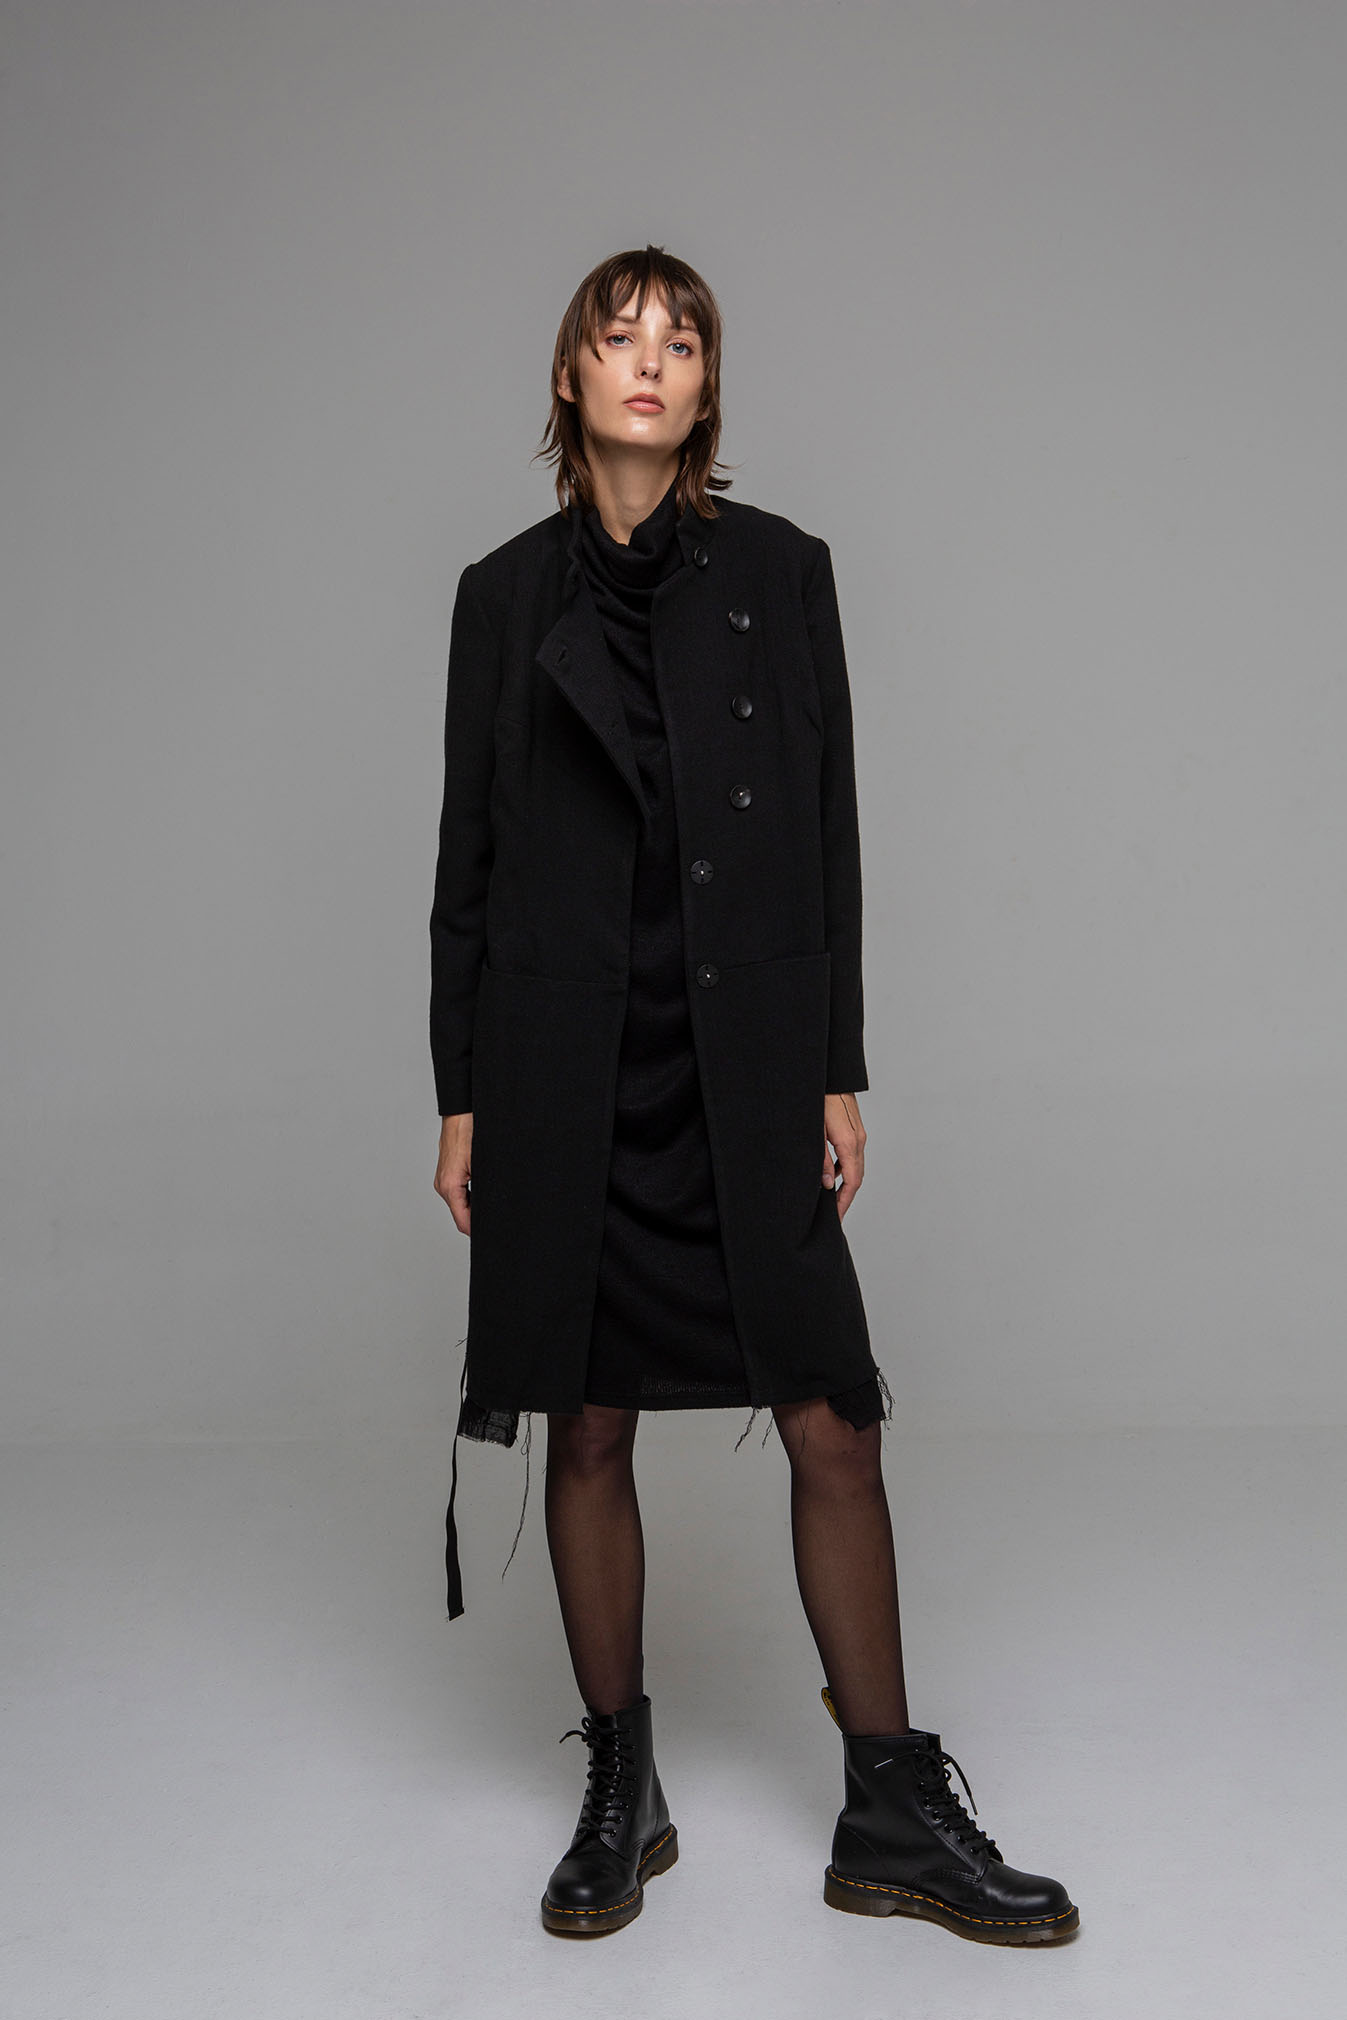 Women's Coat by Noble Athens